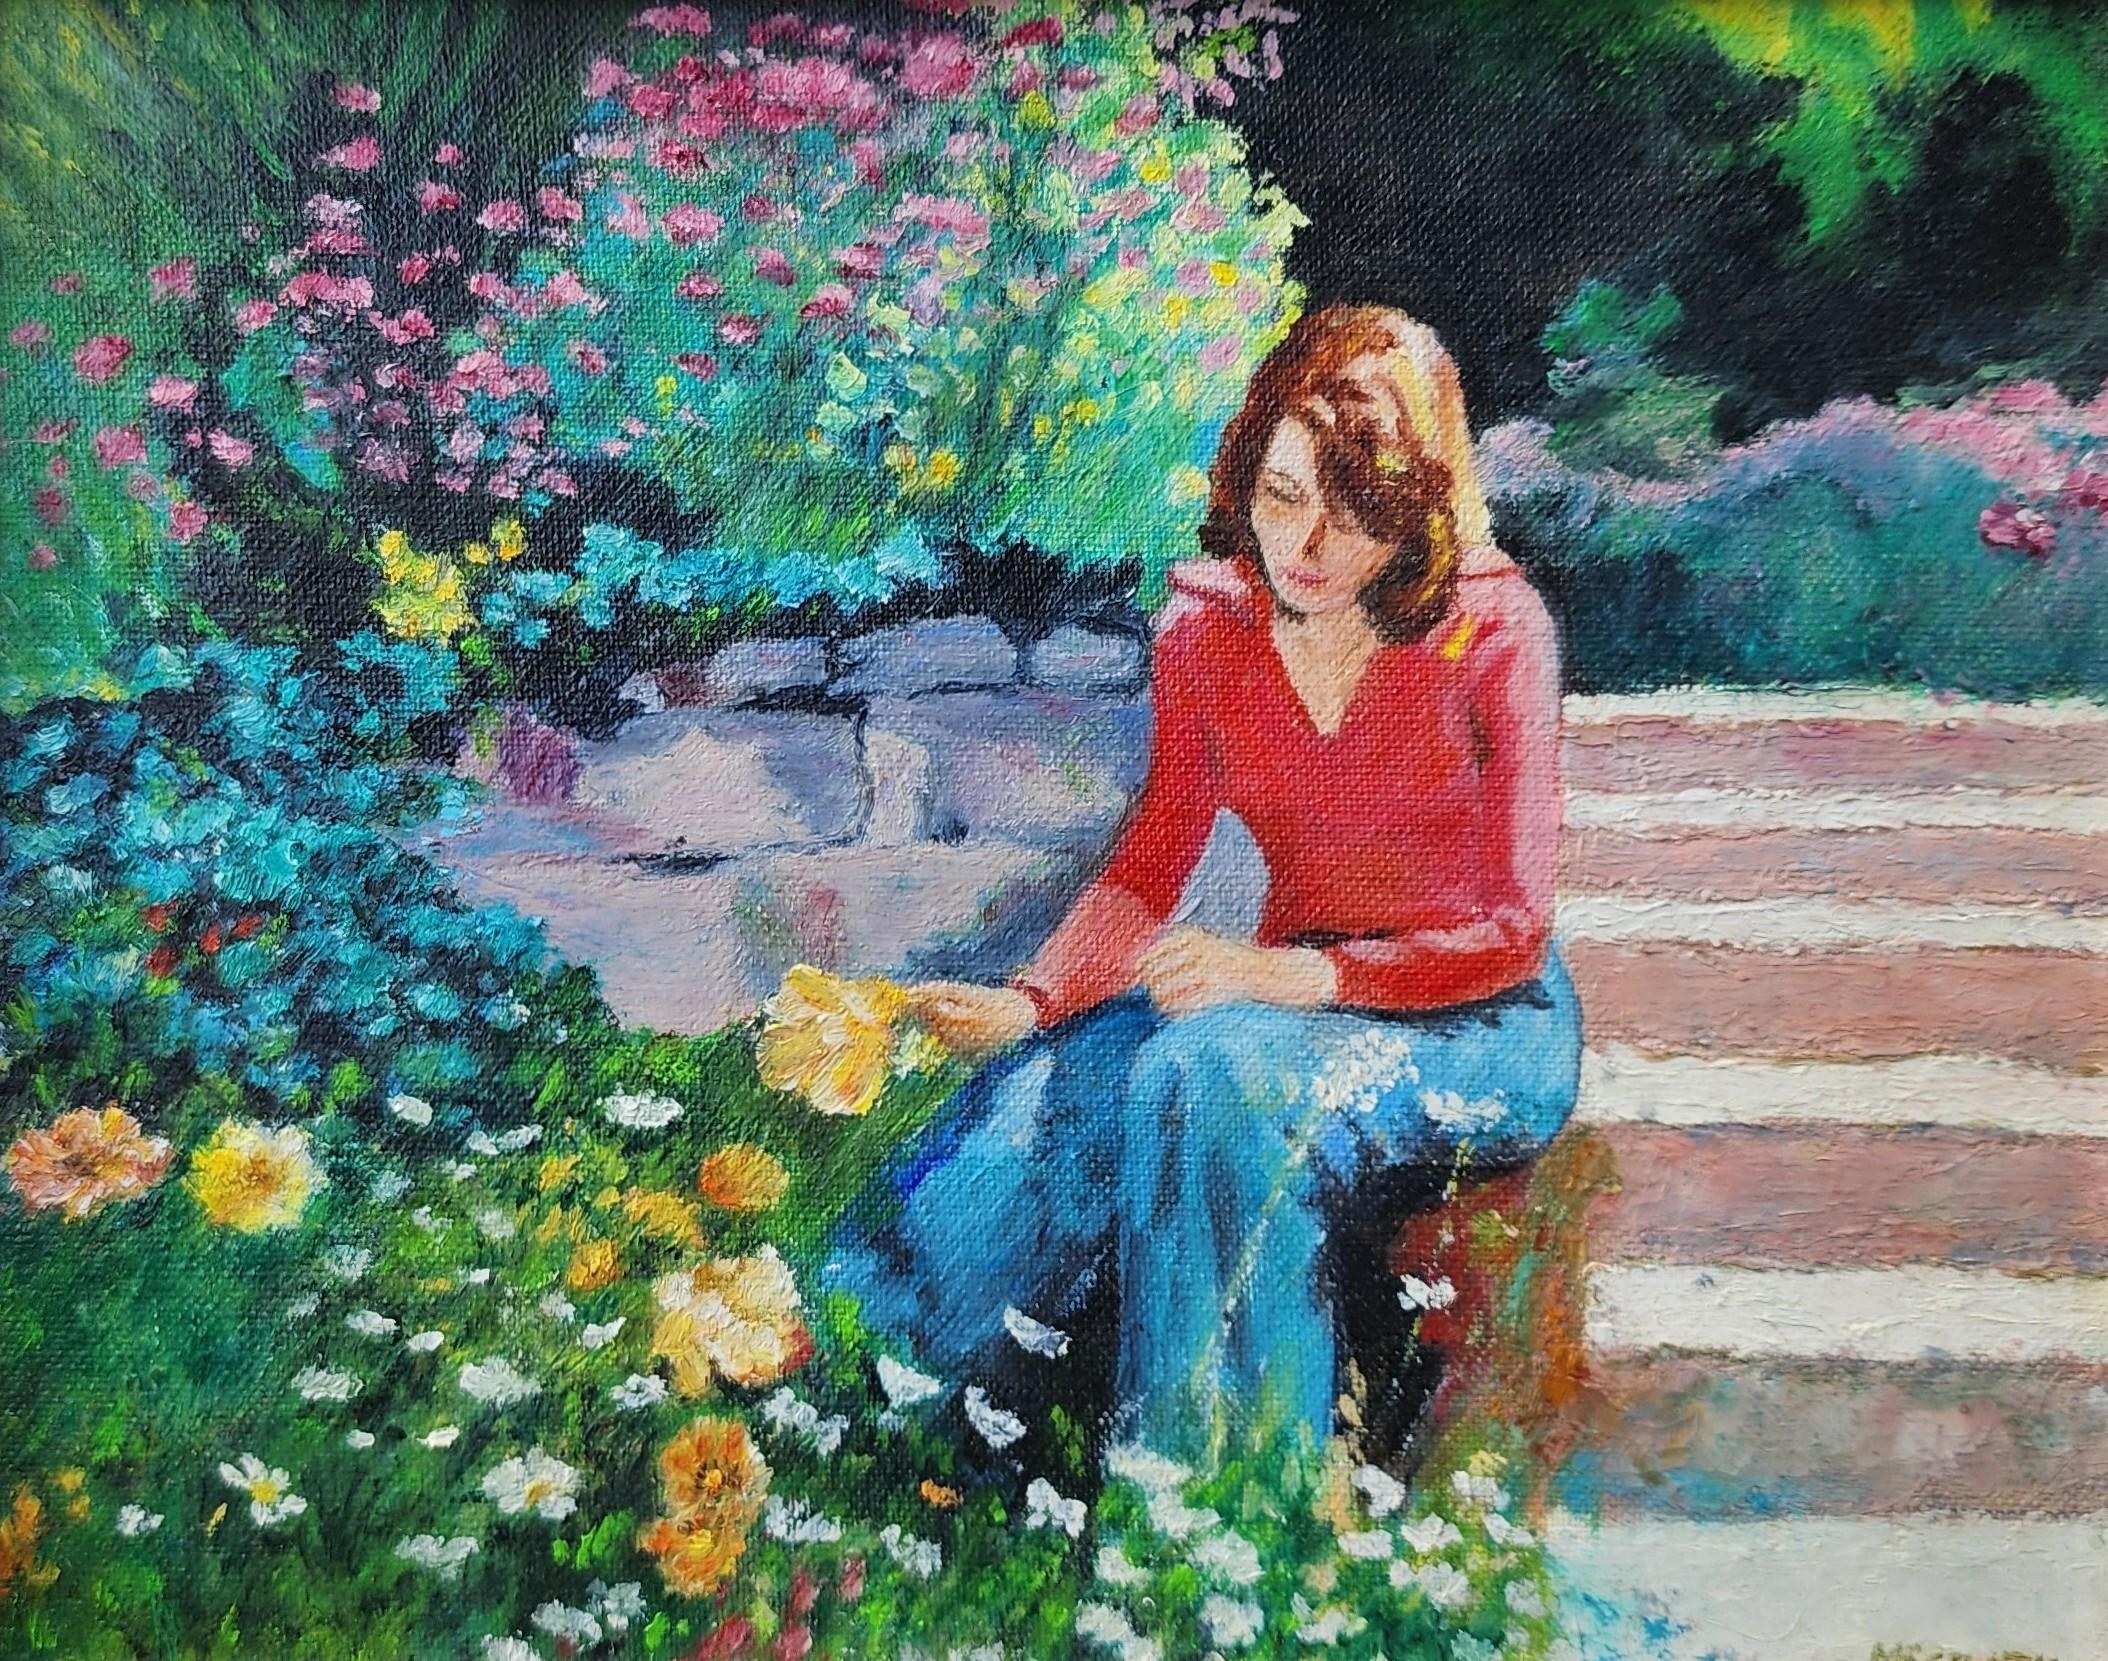 Among the Flowers, Vintage 1970s Portrait of a Girl in a Beautiful Garden - Painting by Unknown